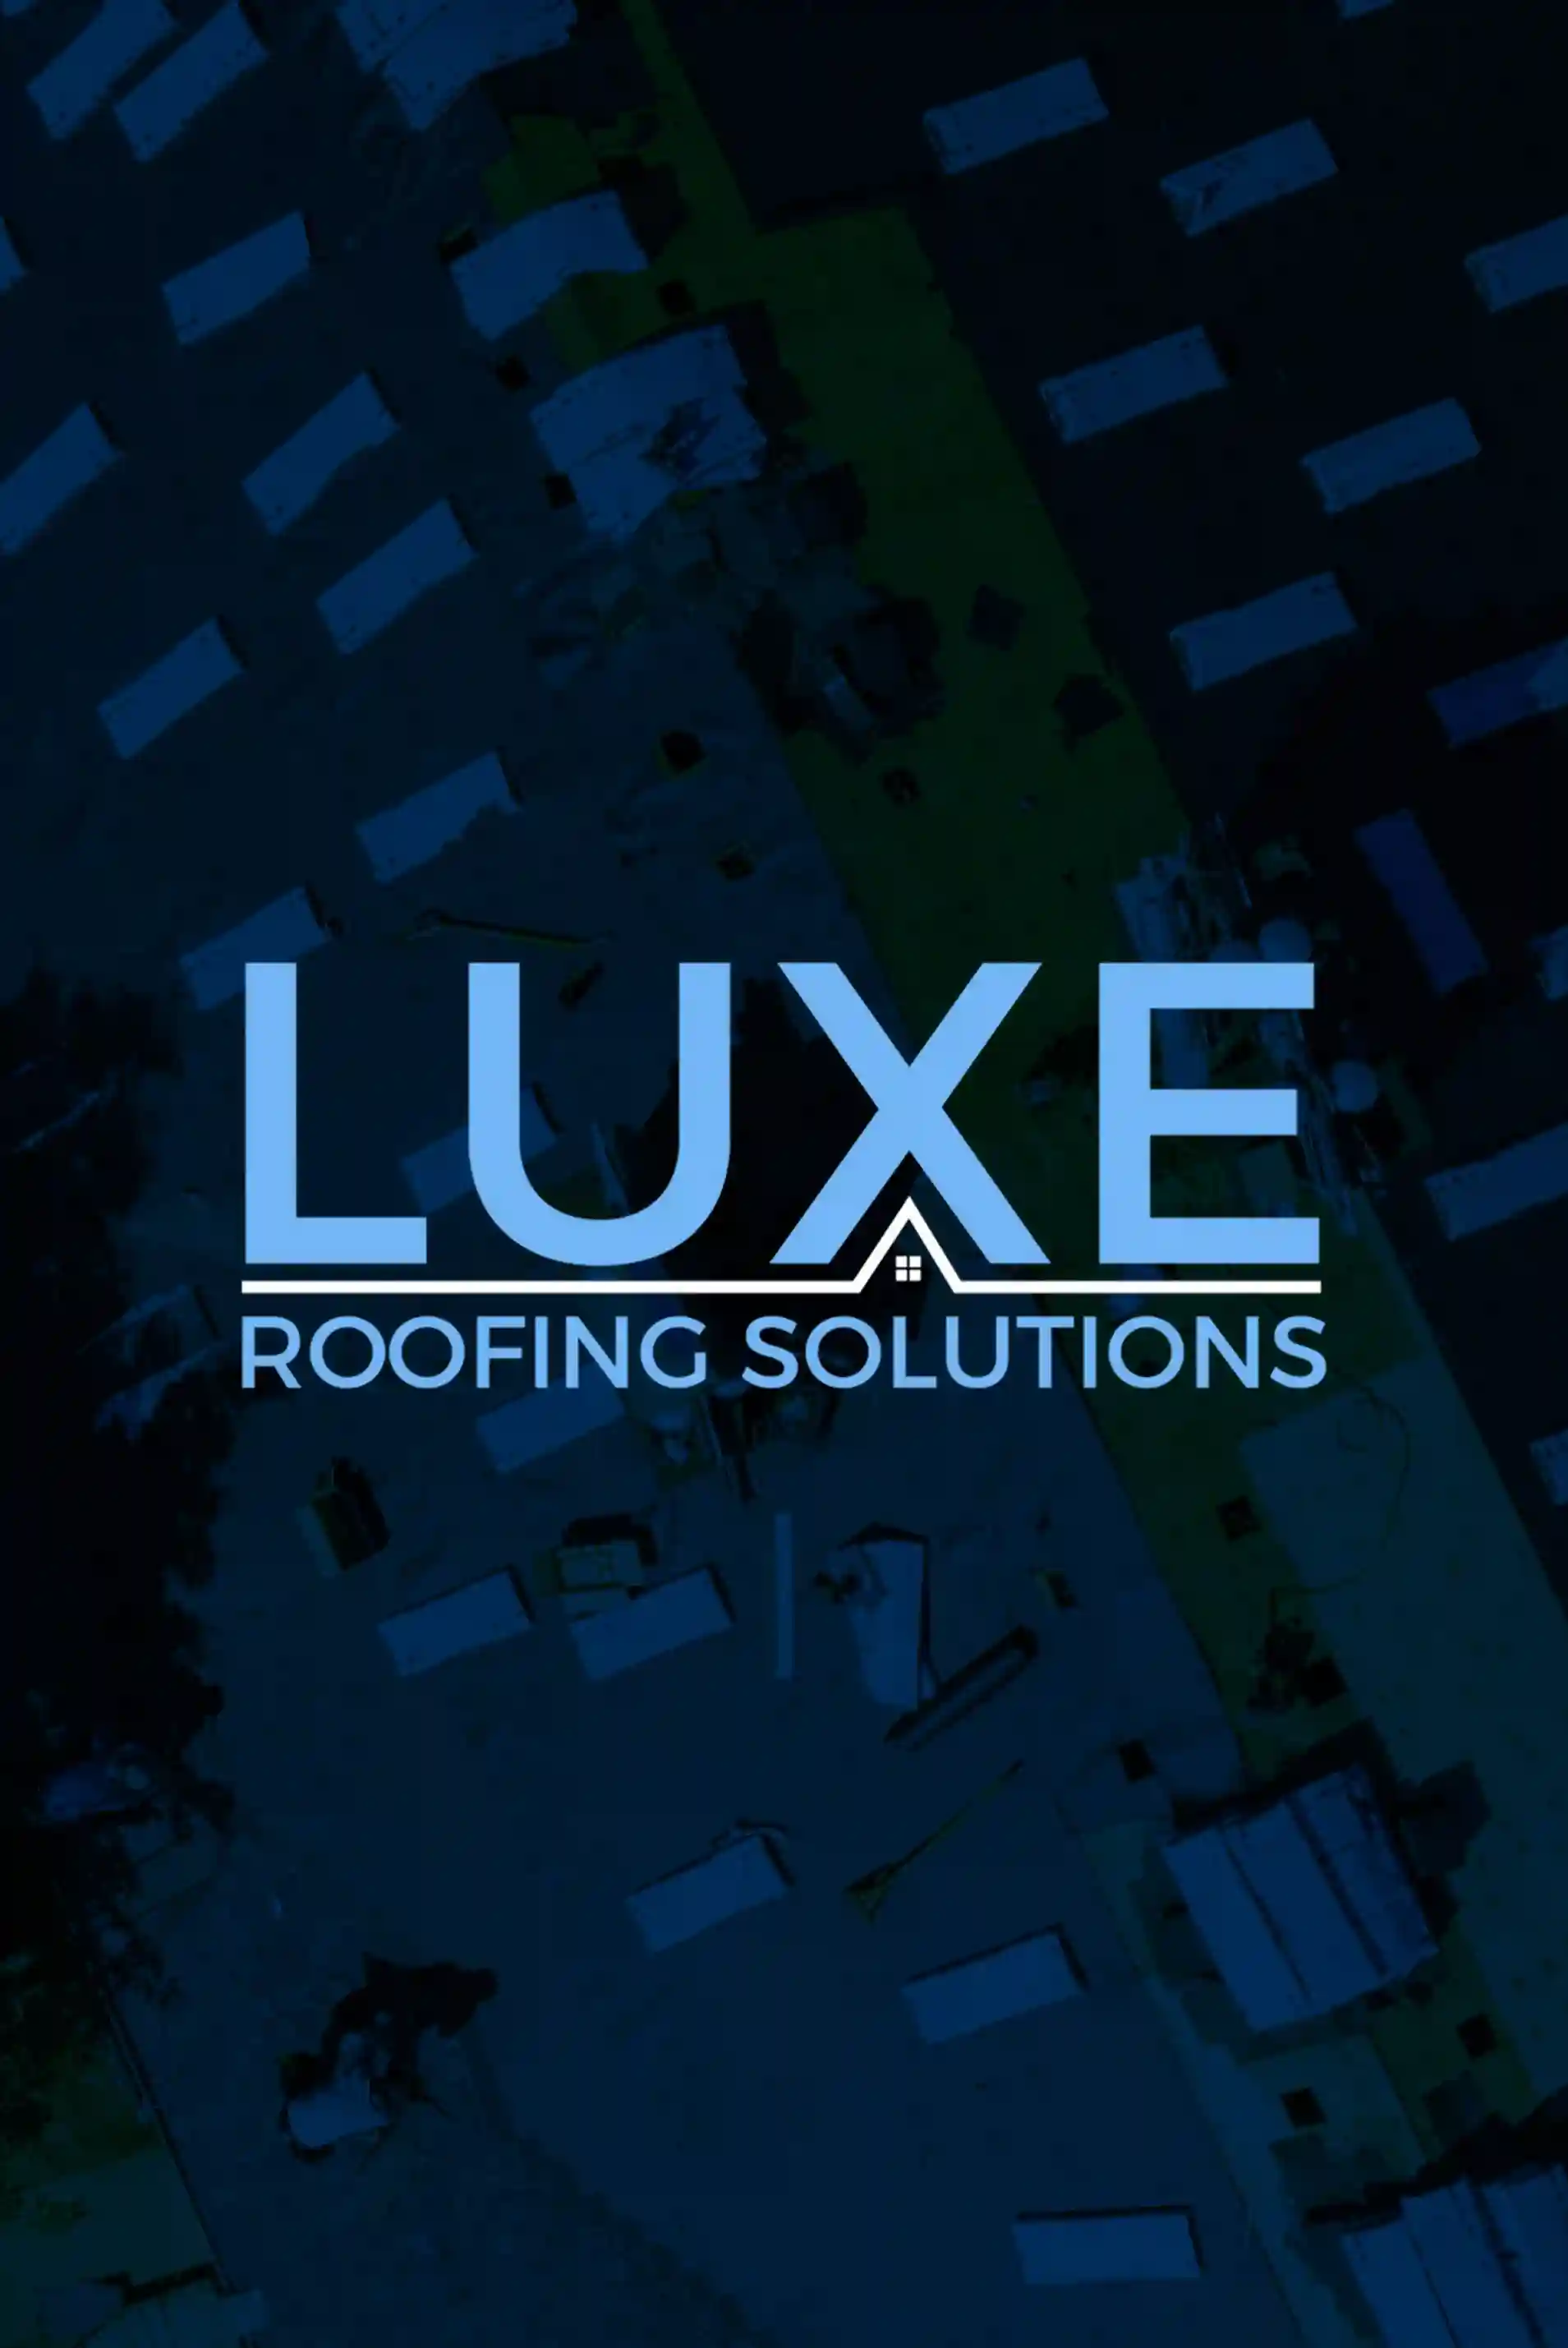 Luxe Roofing Solutions, your trustworthy roofing company